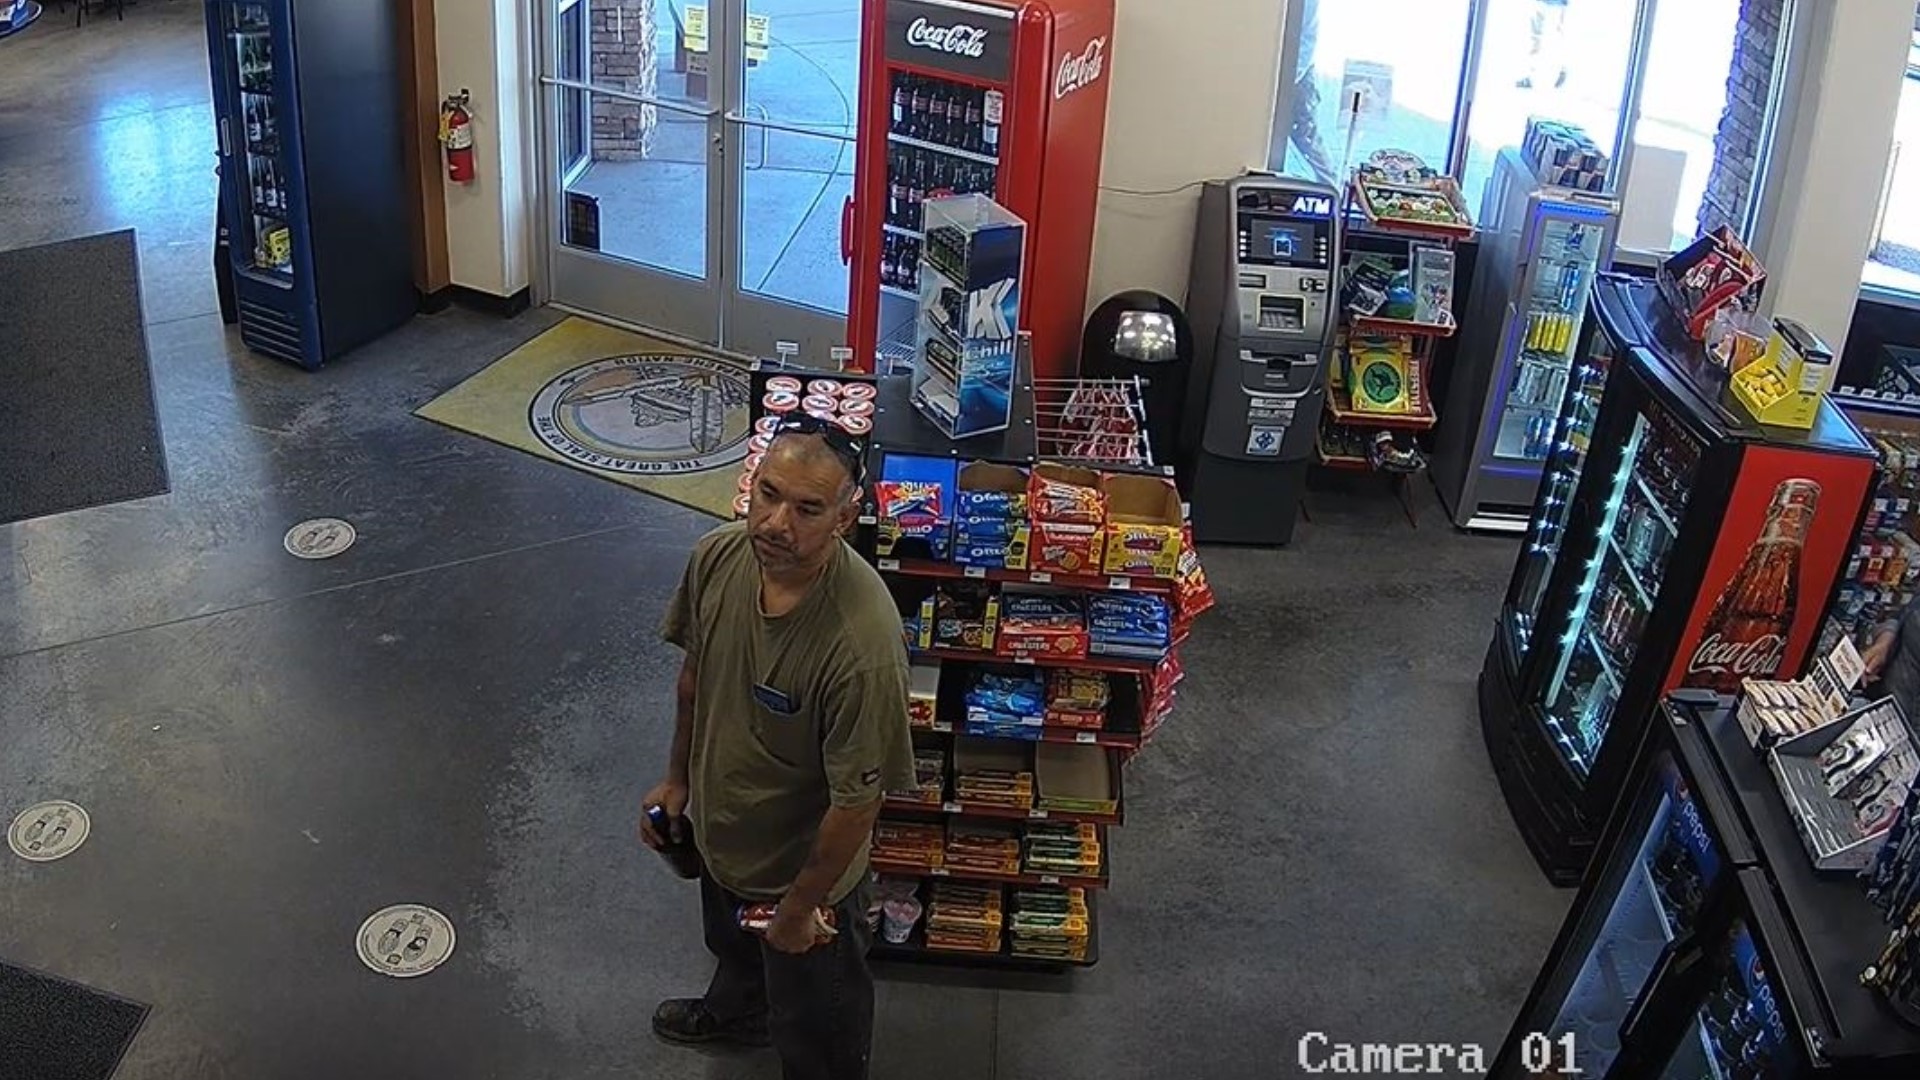 The images appear to show Valentin Rodriguez standing in line at a Camp Verde convenience store hours before Sgt. Preston Brogdon was shot.